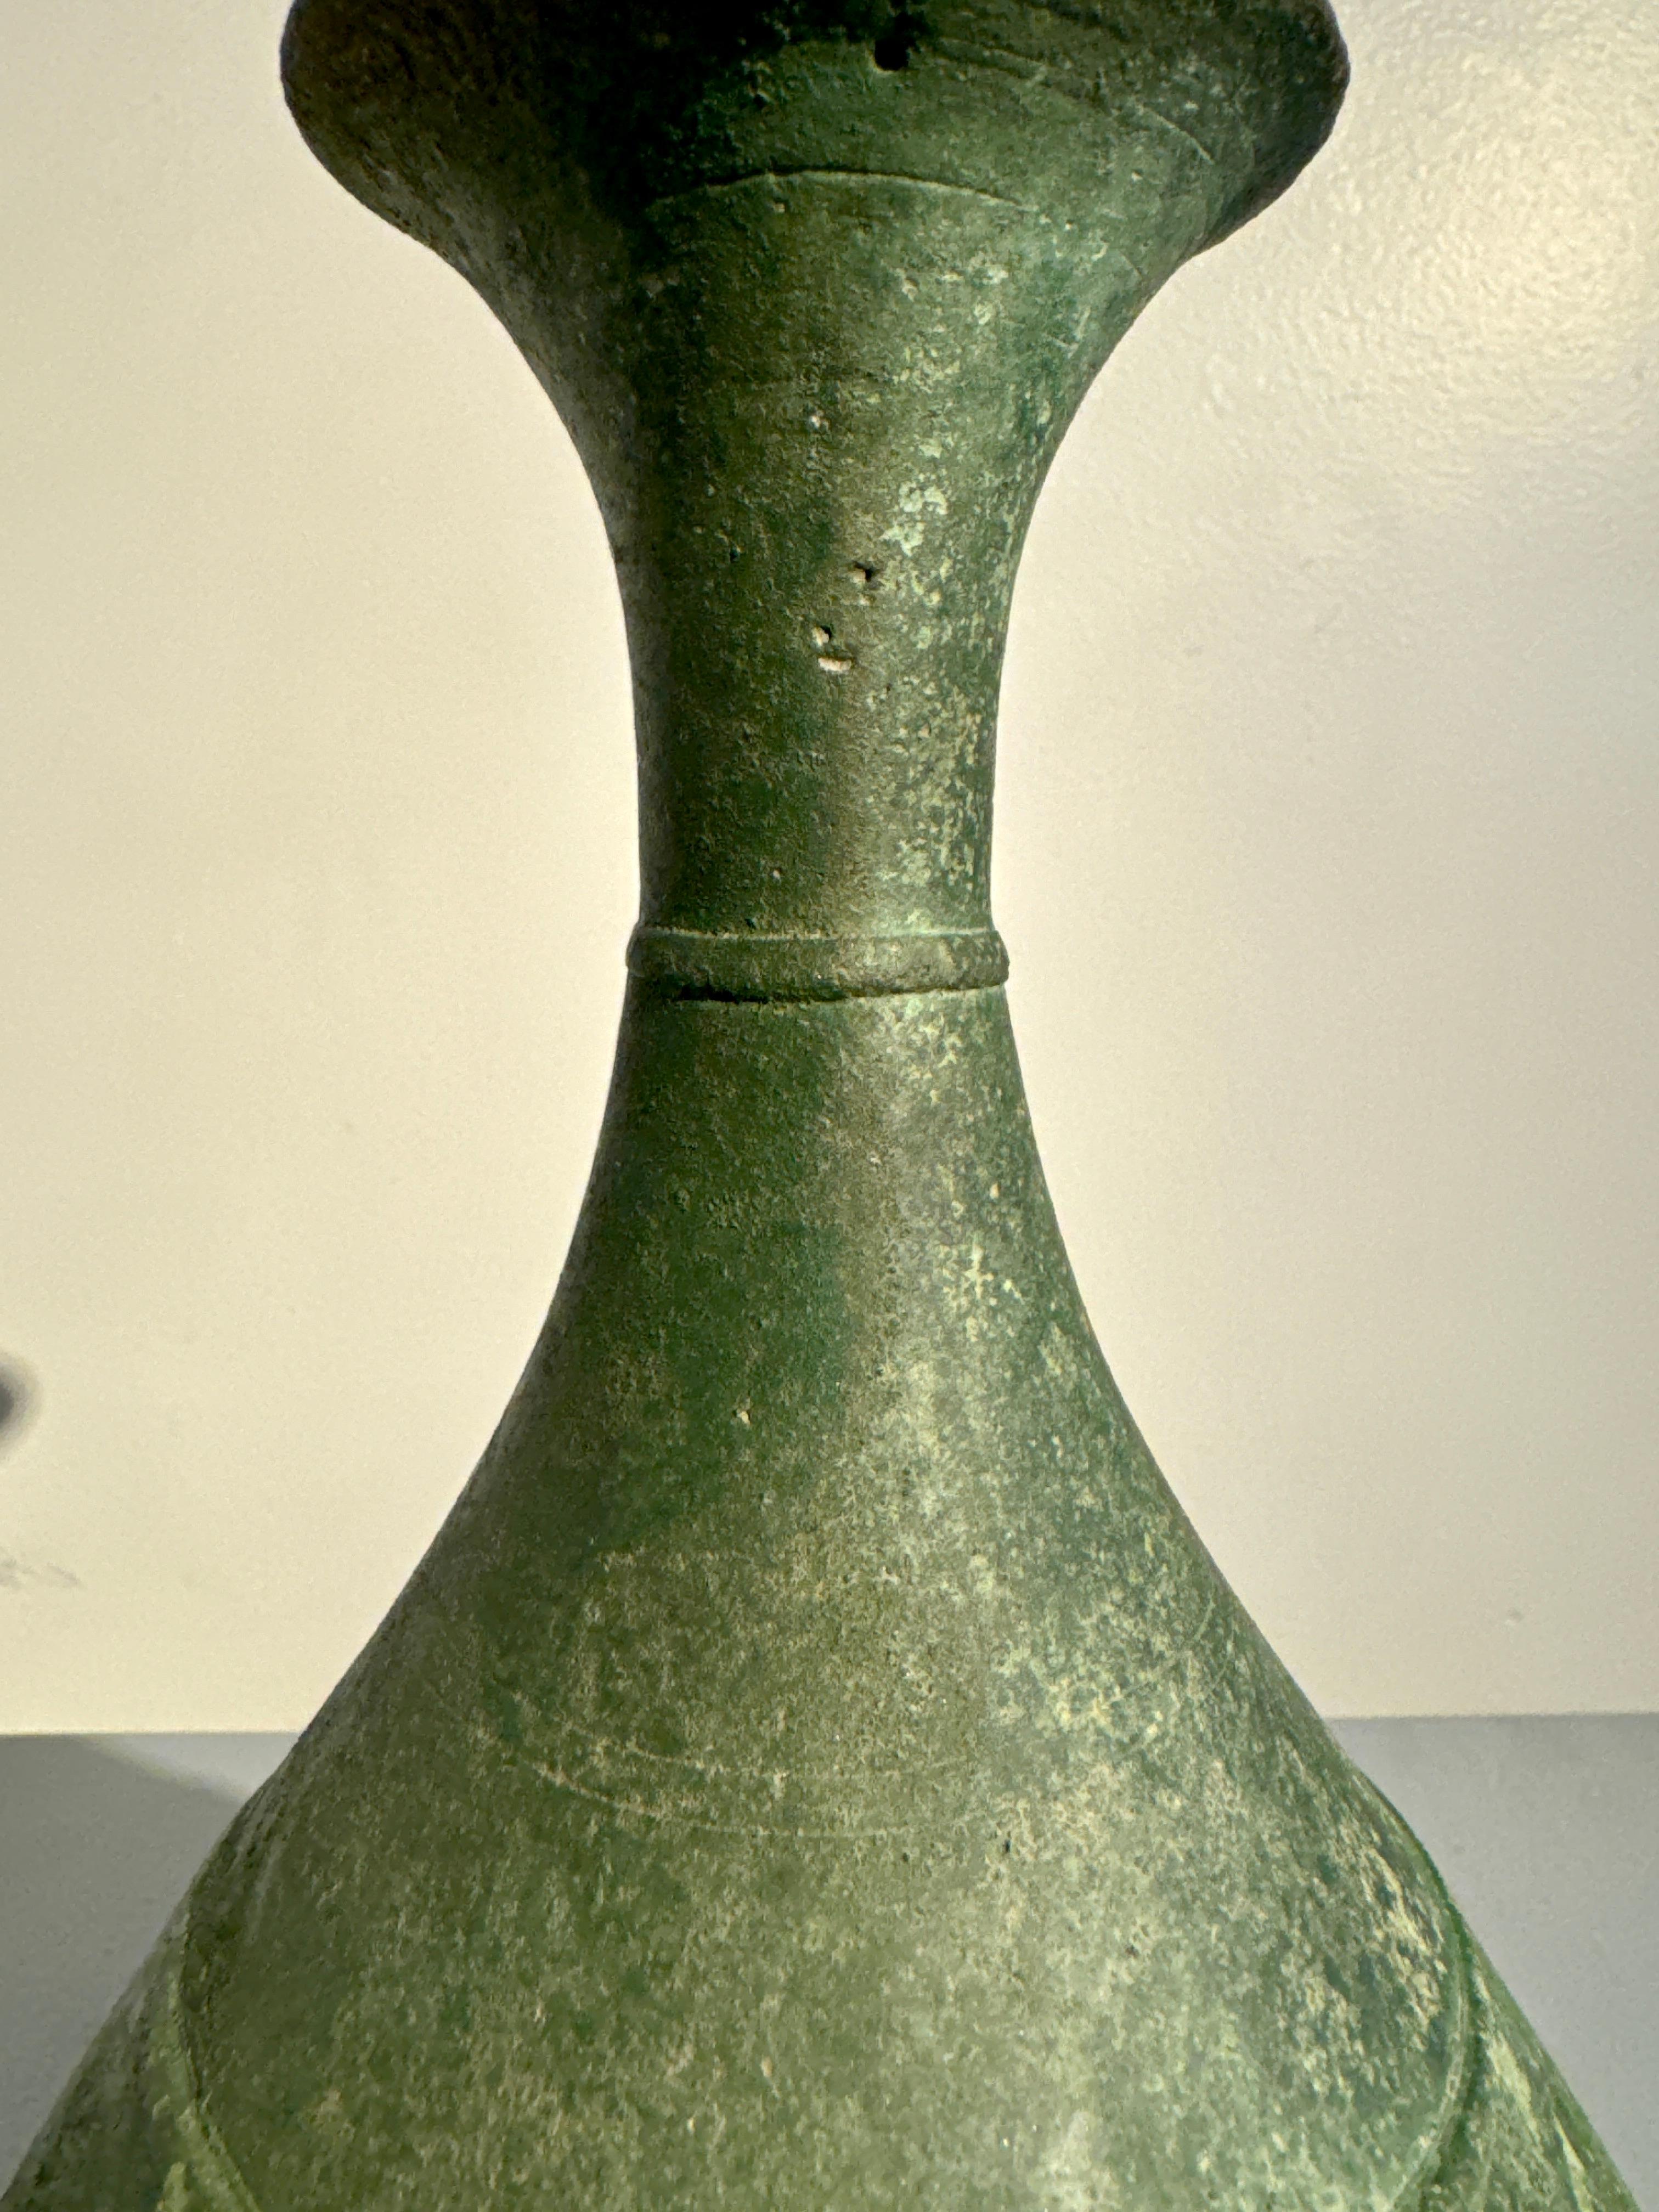 Korean Goryeo Bronze Bottle Vase with Green Patina, 12th/13th Century For Sale 1